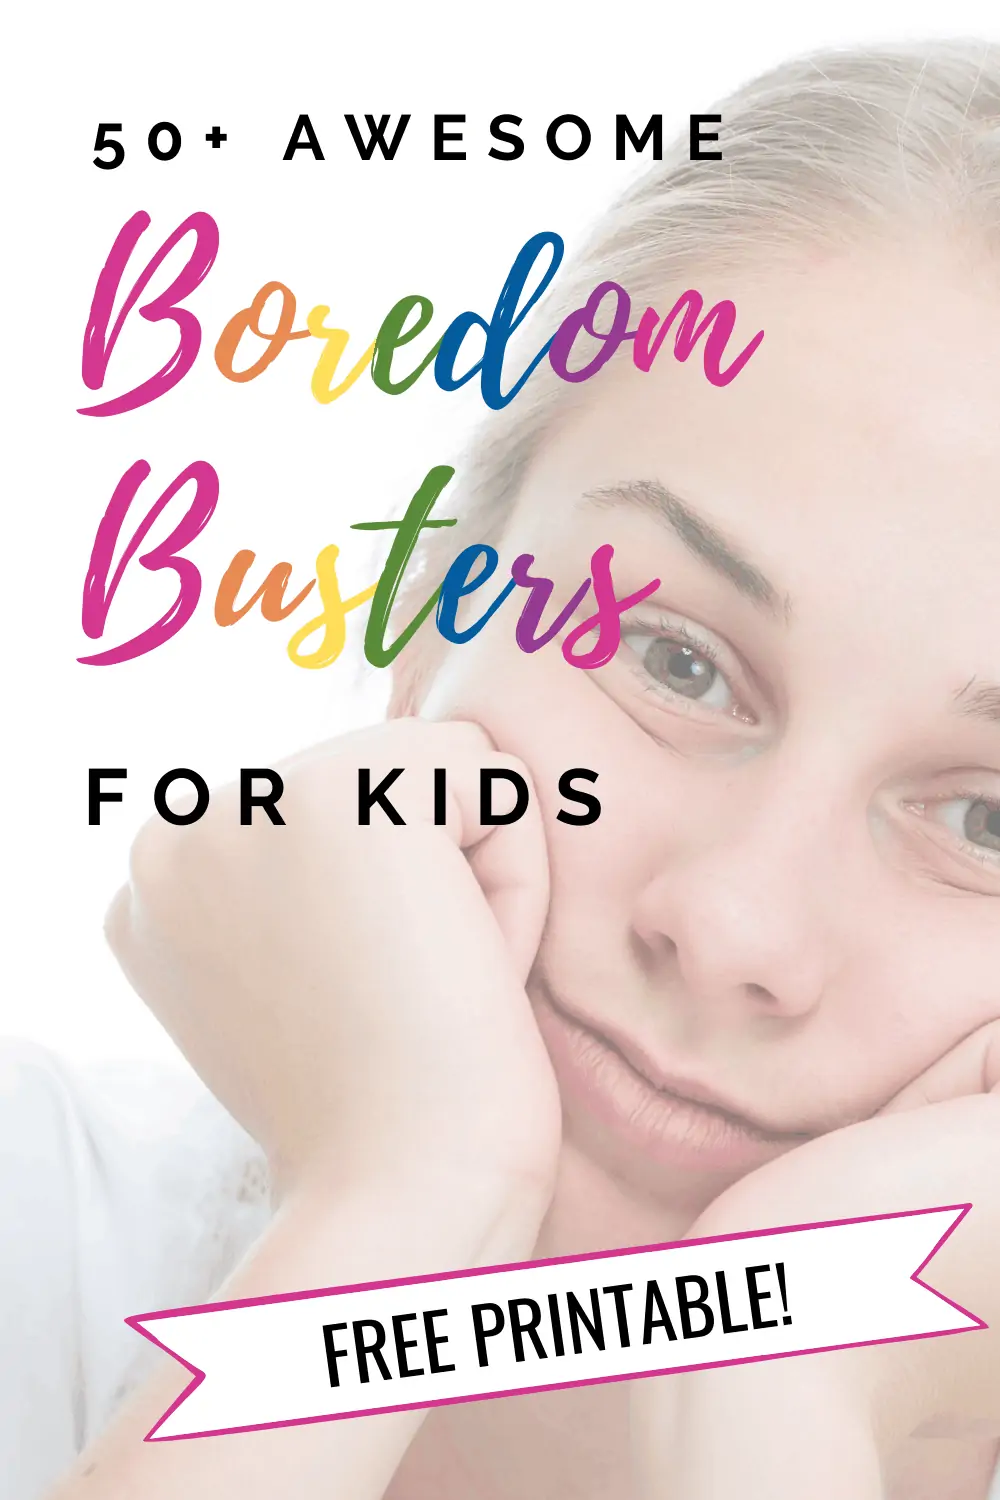 50+ Awesome Boredom Busters for Kids You Need in Your Back Pocket